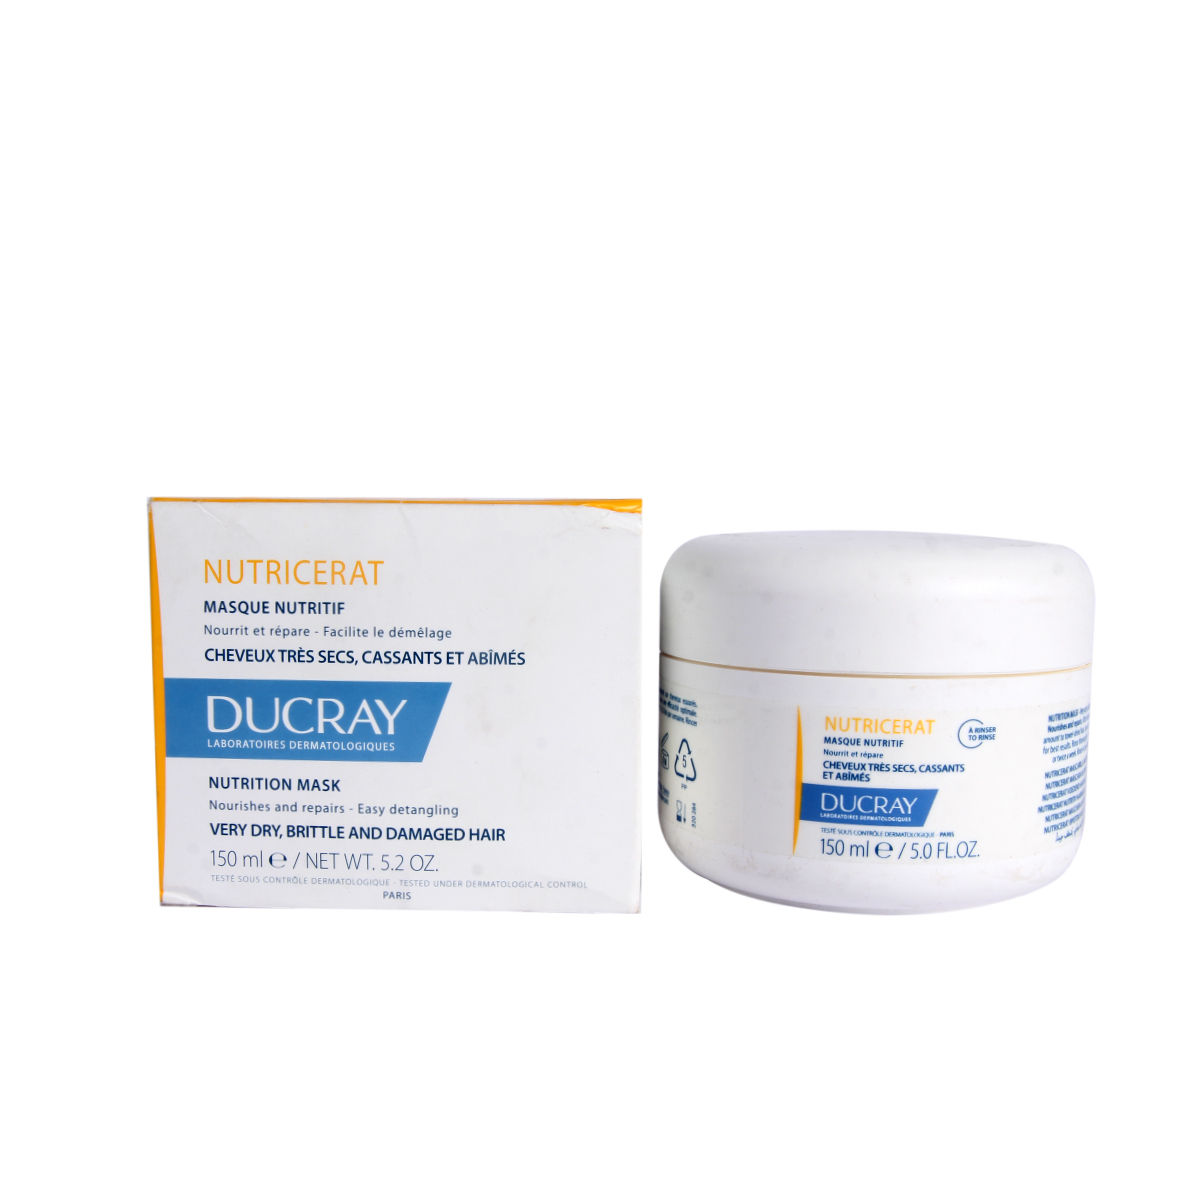 Ducray Nutricerat Nutrition Mask, 150 ml, Pack of 1 